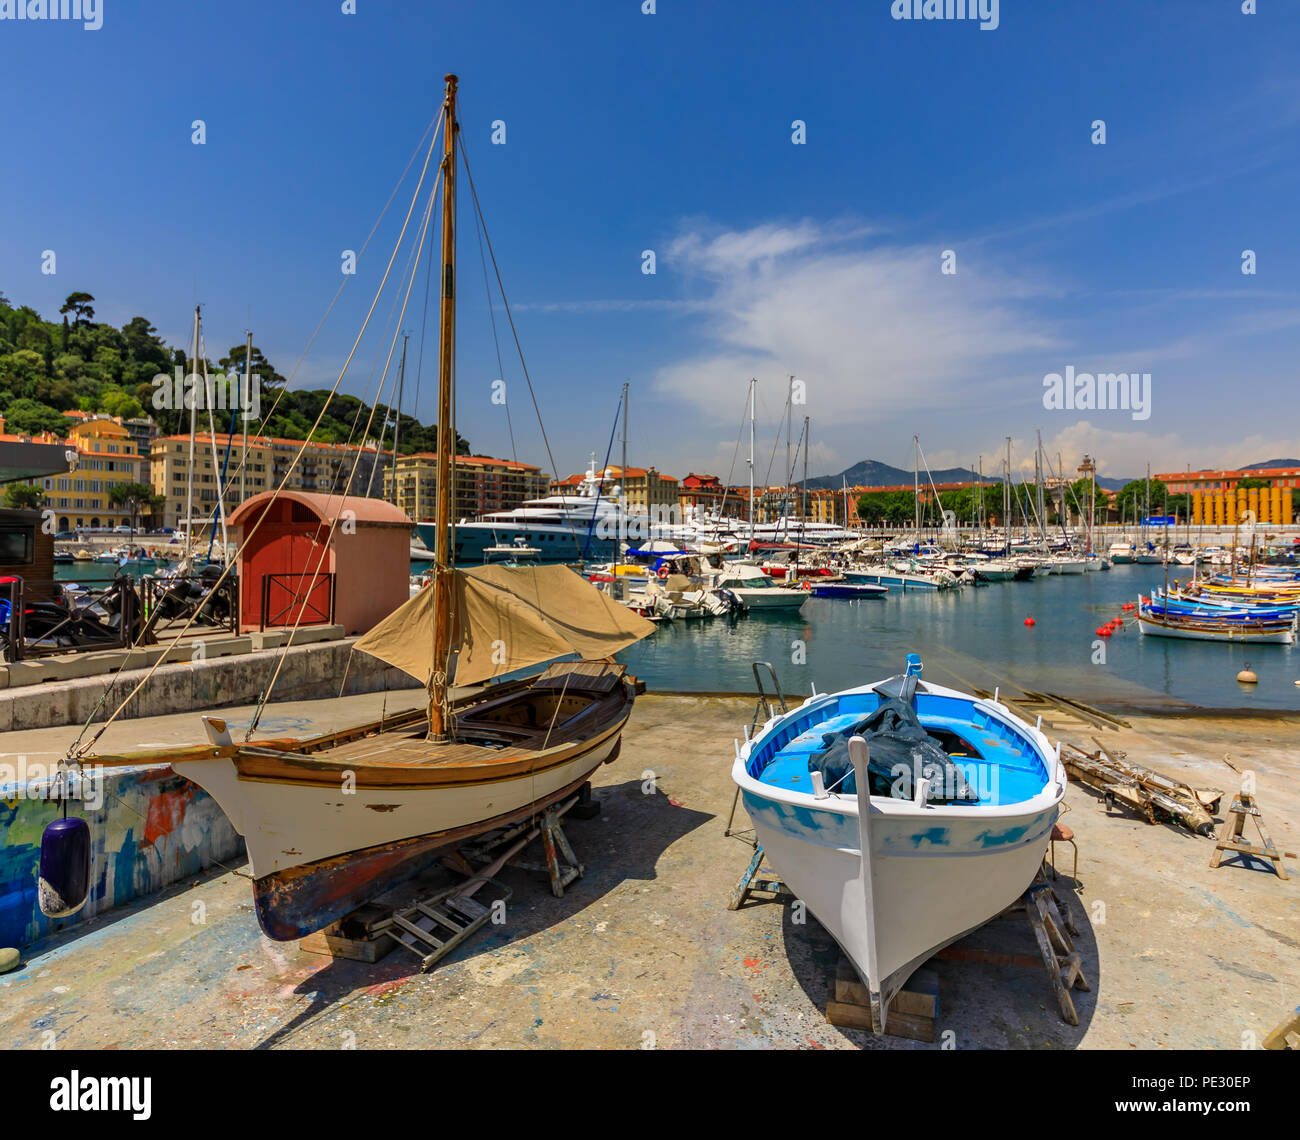 Old classic wooden boats on shore for repairs in Lympia port of Nice, Côte d'Azur, France Stock Photo